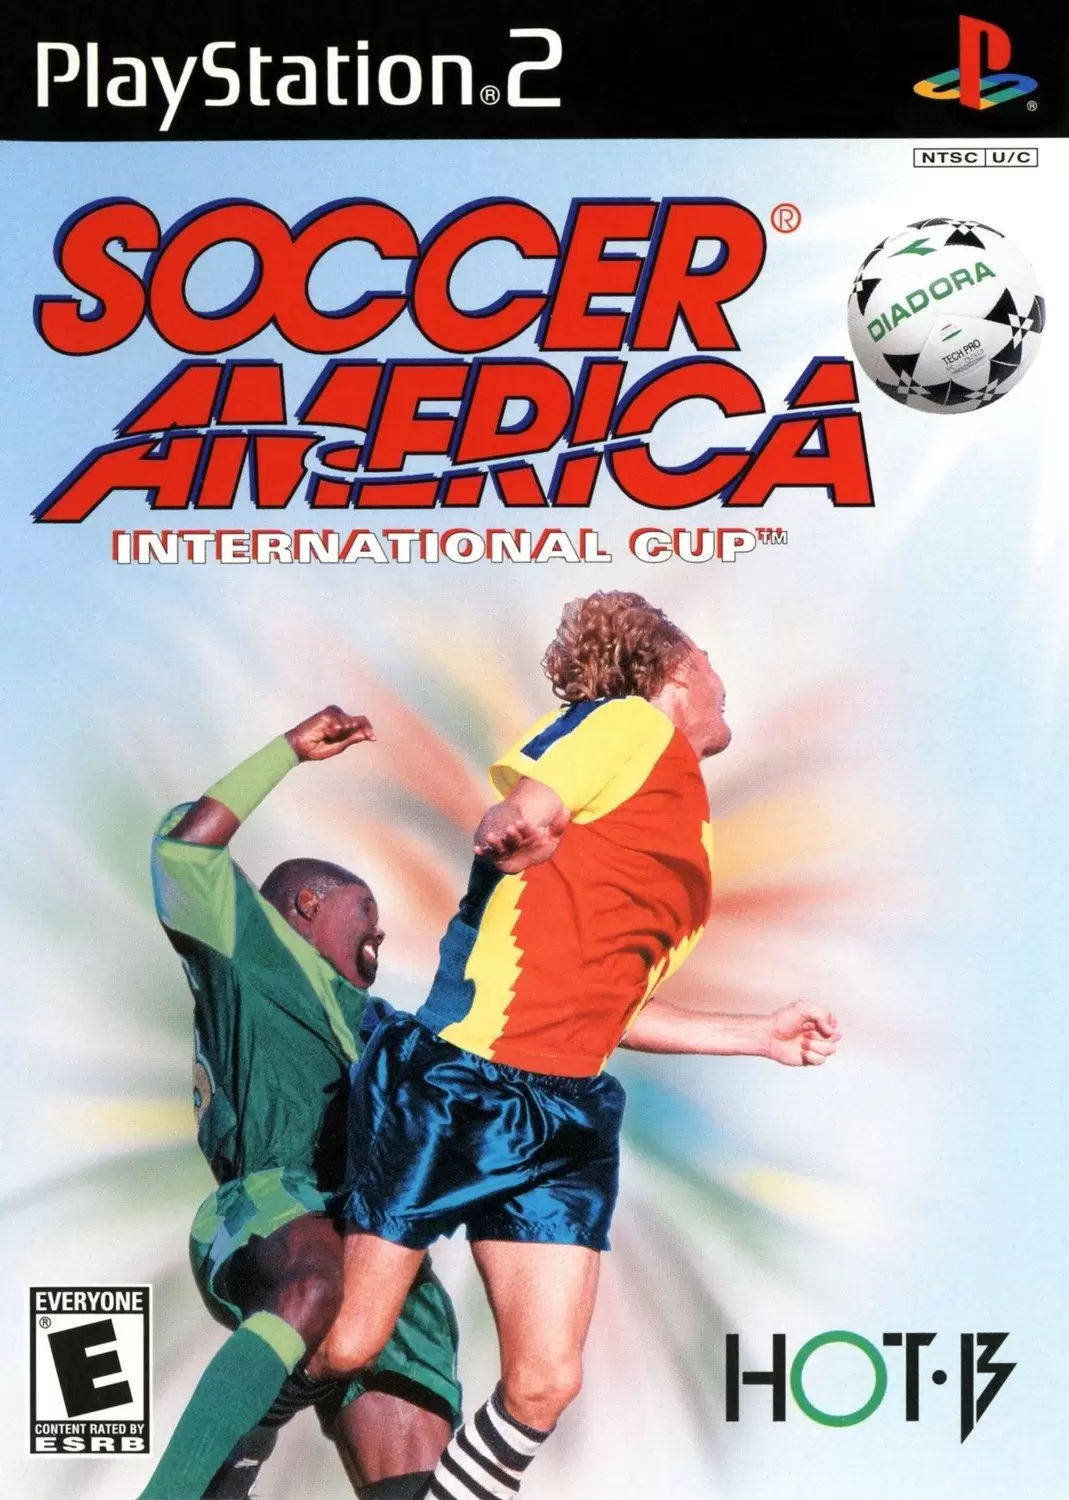 PS2 Games - Soccer America International Cup